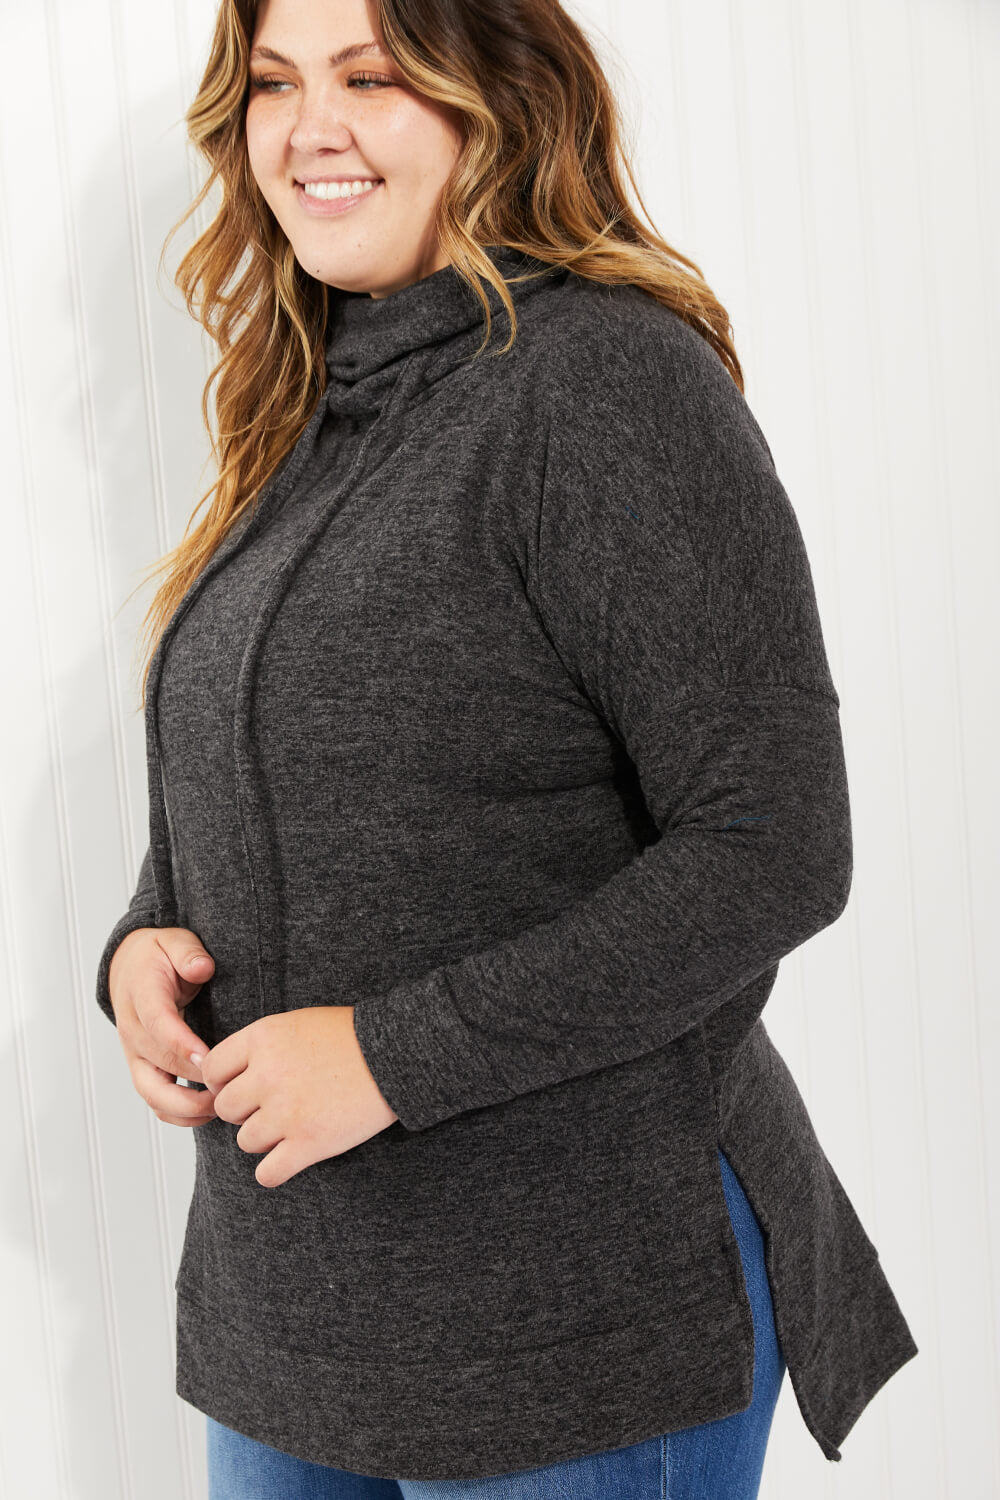 Zenana Brushed Funnel Neck Sweater - Rayon/Poly/Spandex Sizes: XS - 3X) (Sale Price: $59.49 CAD)